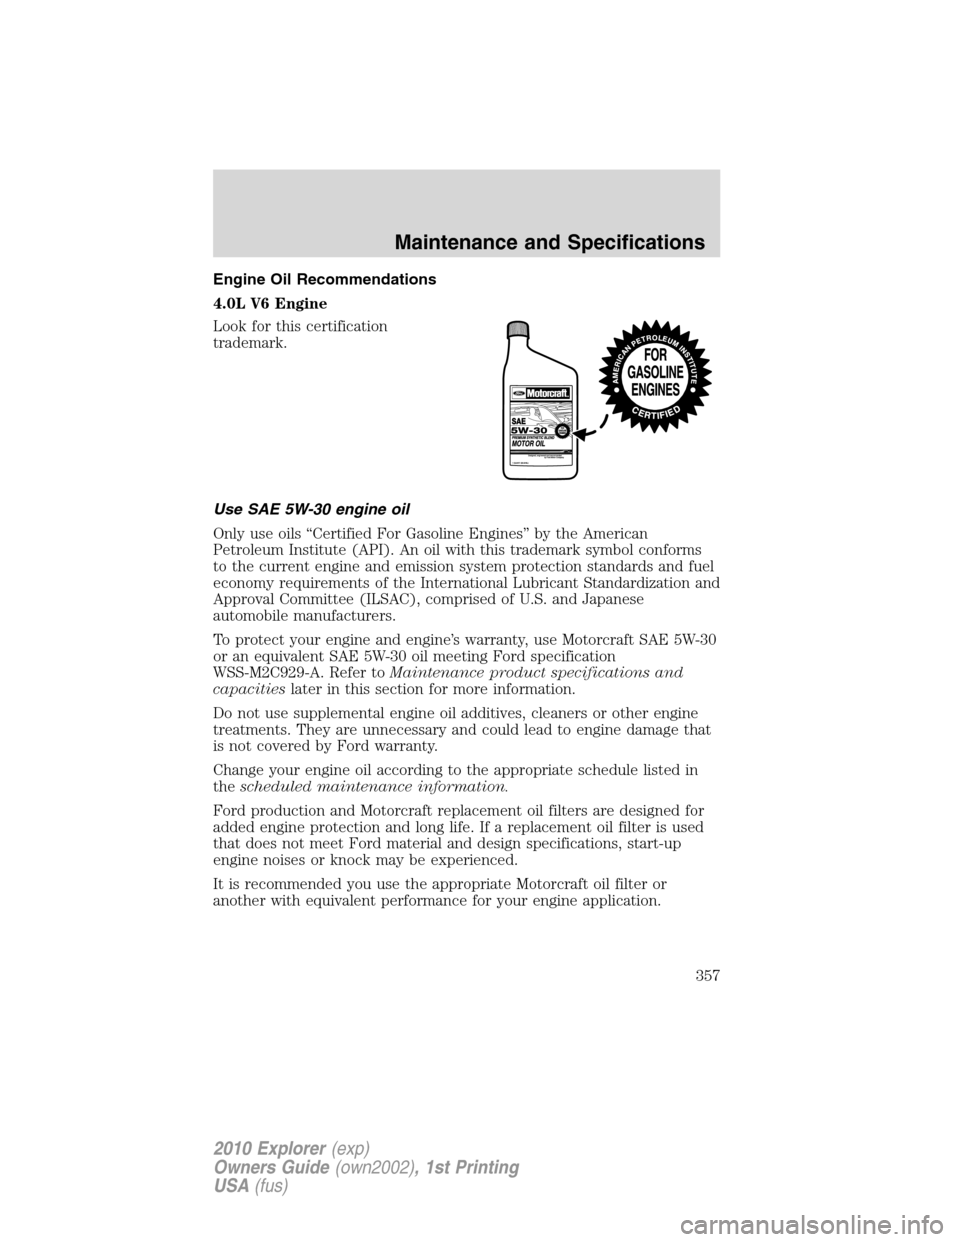 FORD EXPLORER 2010 4.G Owners Manual Engine Oil Recommendations
4.0L V6 Engine
Look for this certification
trademark.
Use SAE 5W-30 engine oil
Only use oils “Certified For Gasoline Engines” by the American
Petroleum Institute (API). 